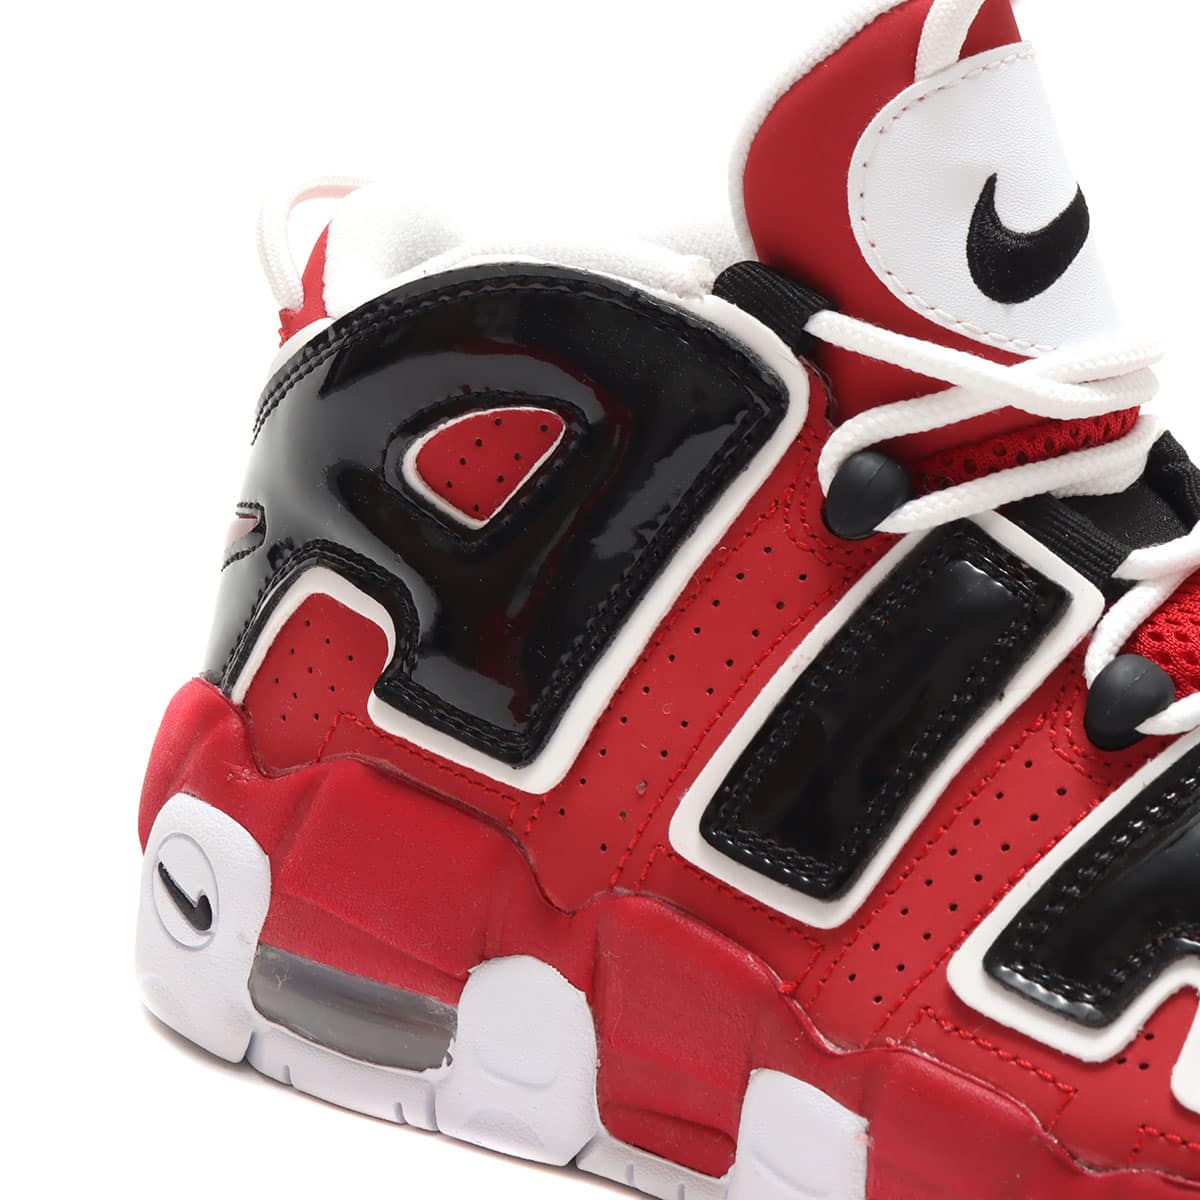 NIKE AIR MORE UPTEMPO "RAYGUNS"